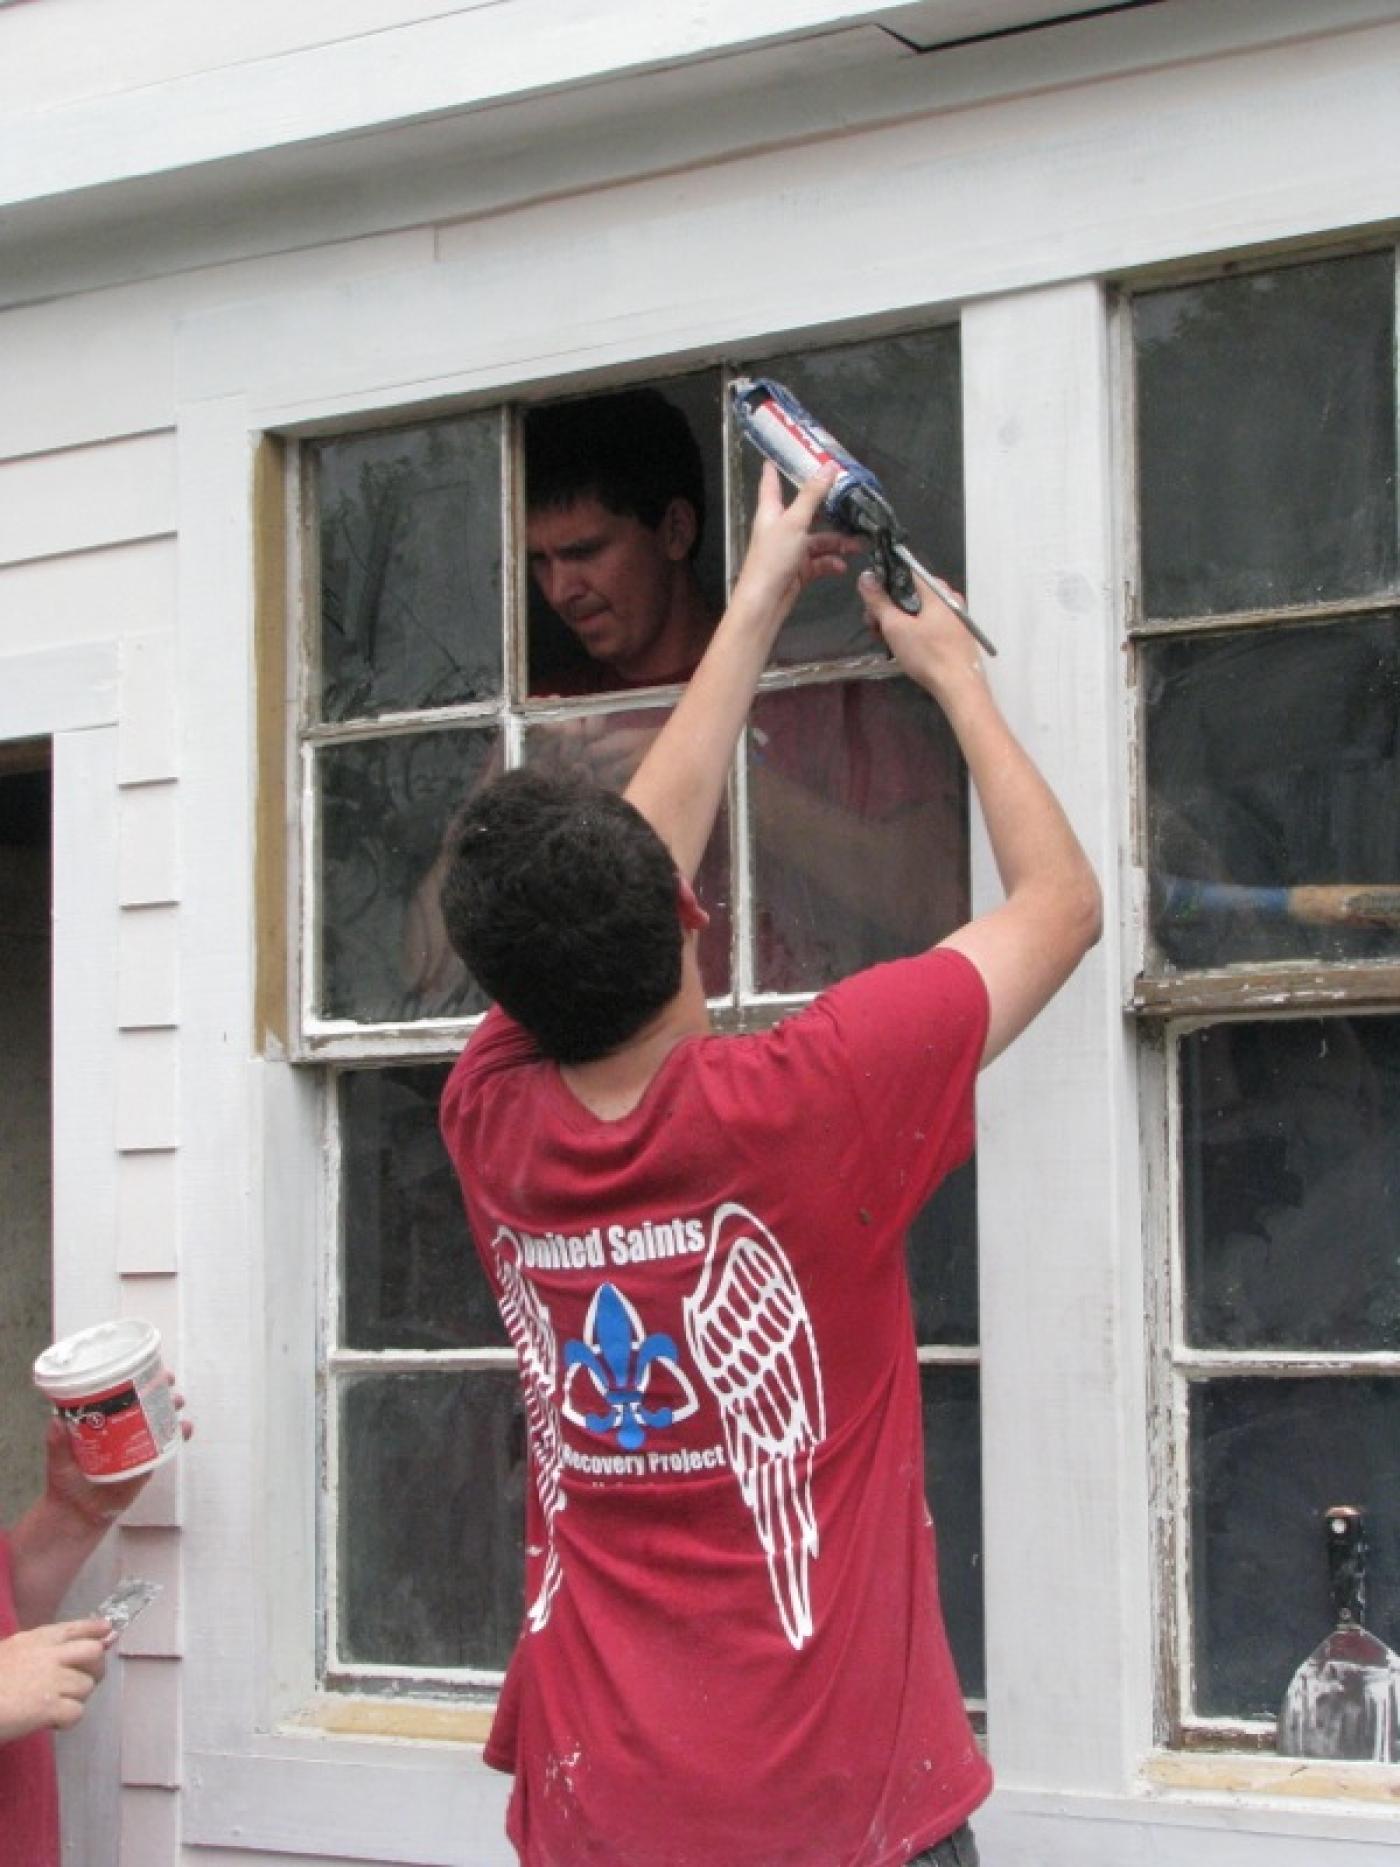 United Saints volunteers complete work on a house in New Orleans.